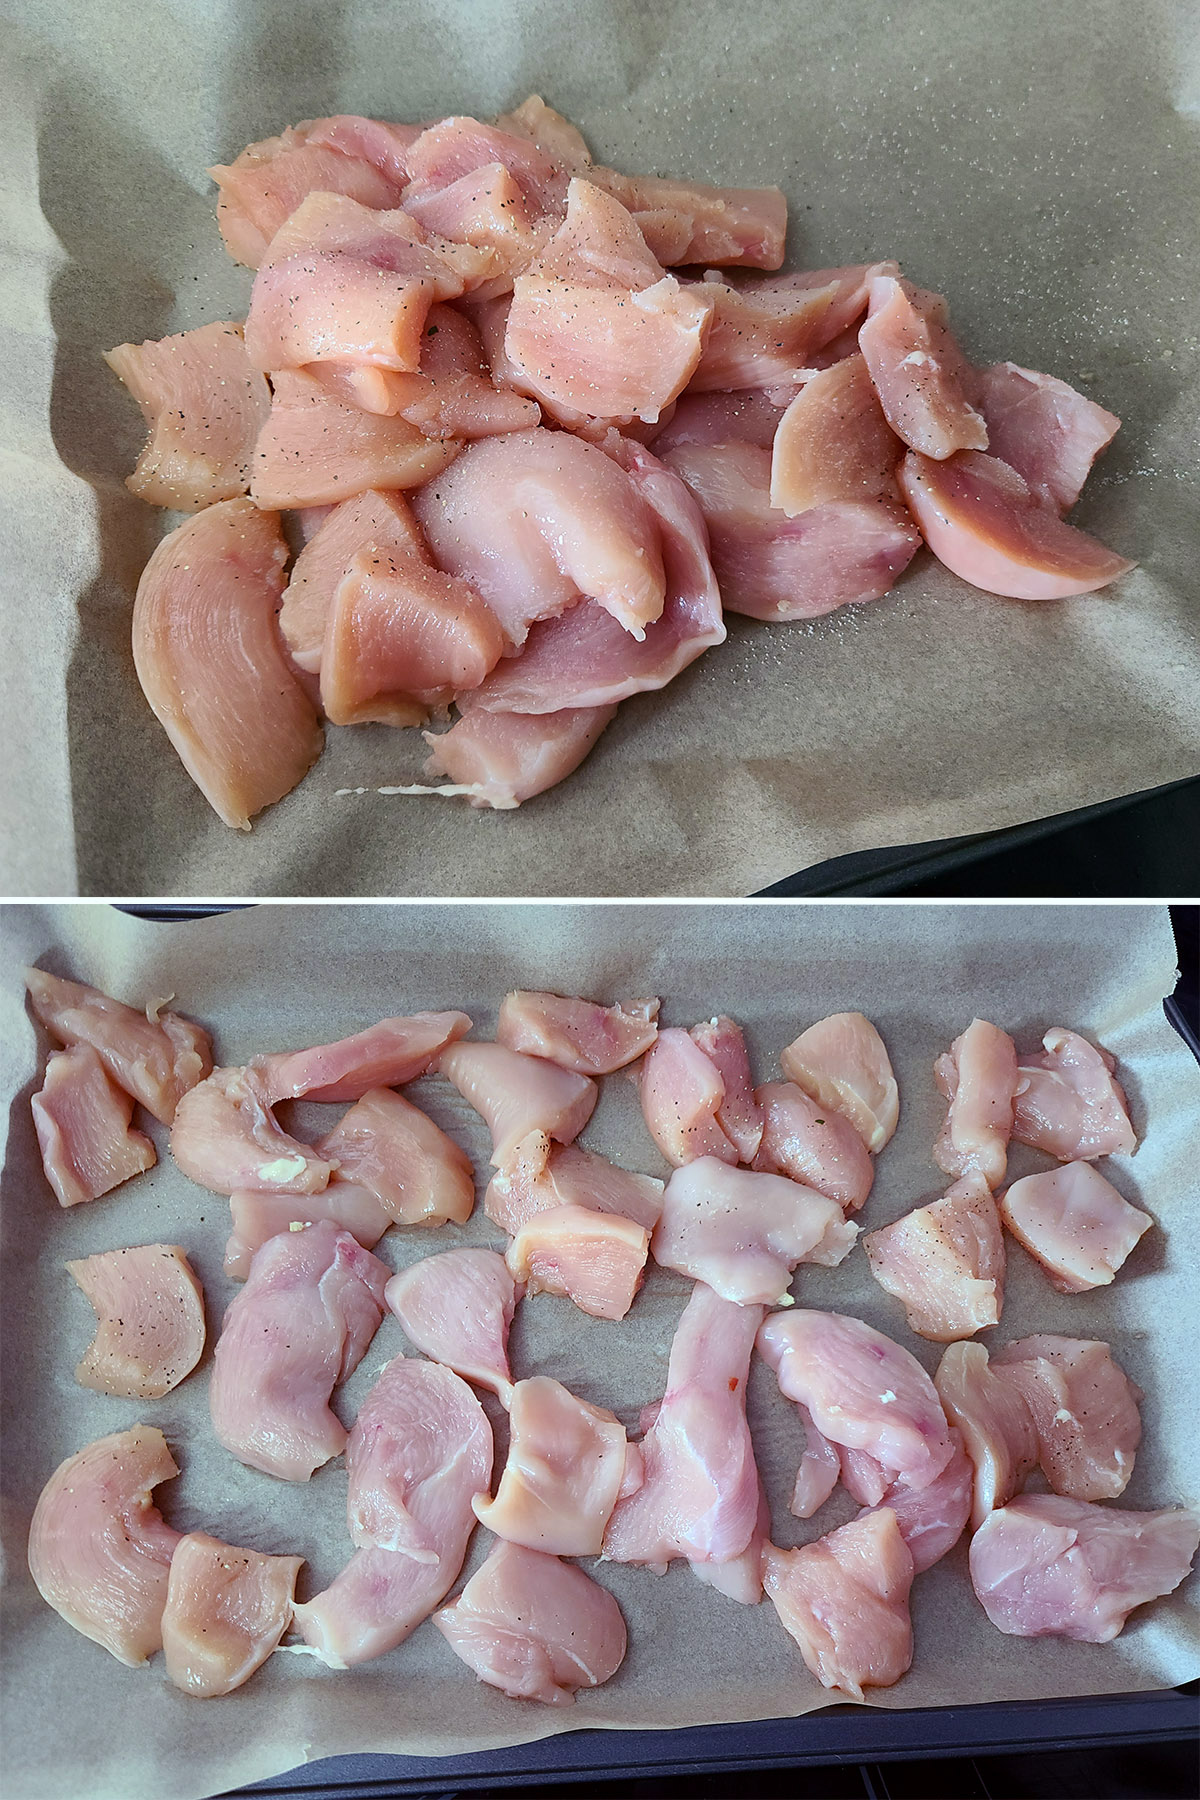 A 2 part image showing chicken breast chunks seasoned with salt and pepper, and spread on a pan.